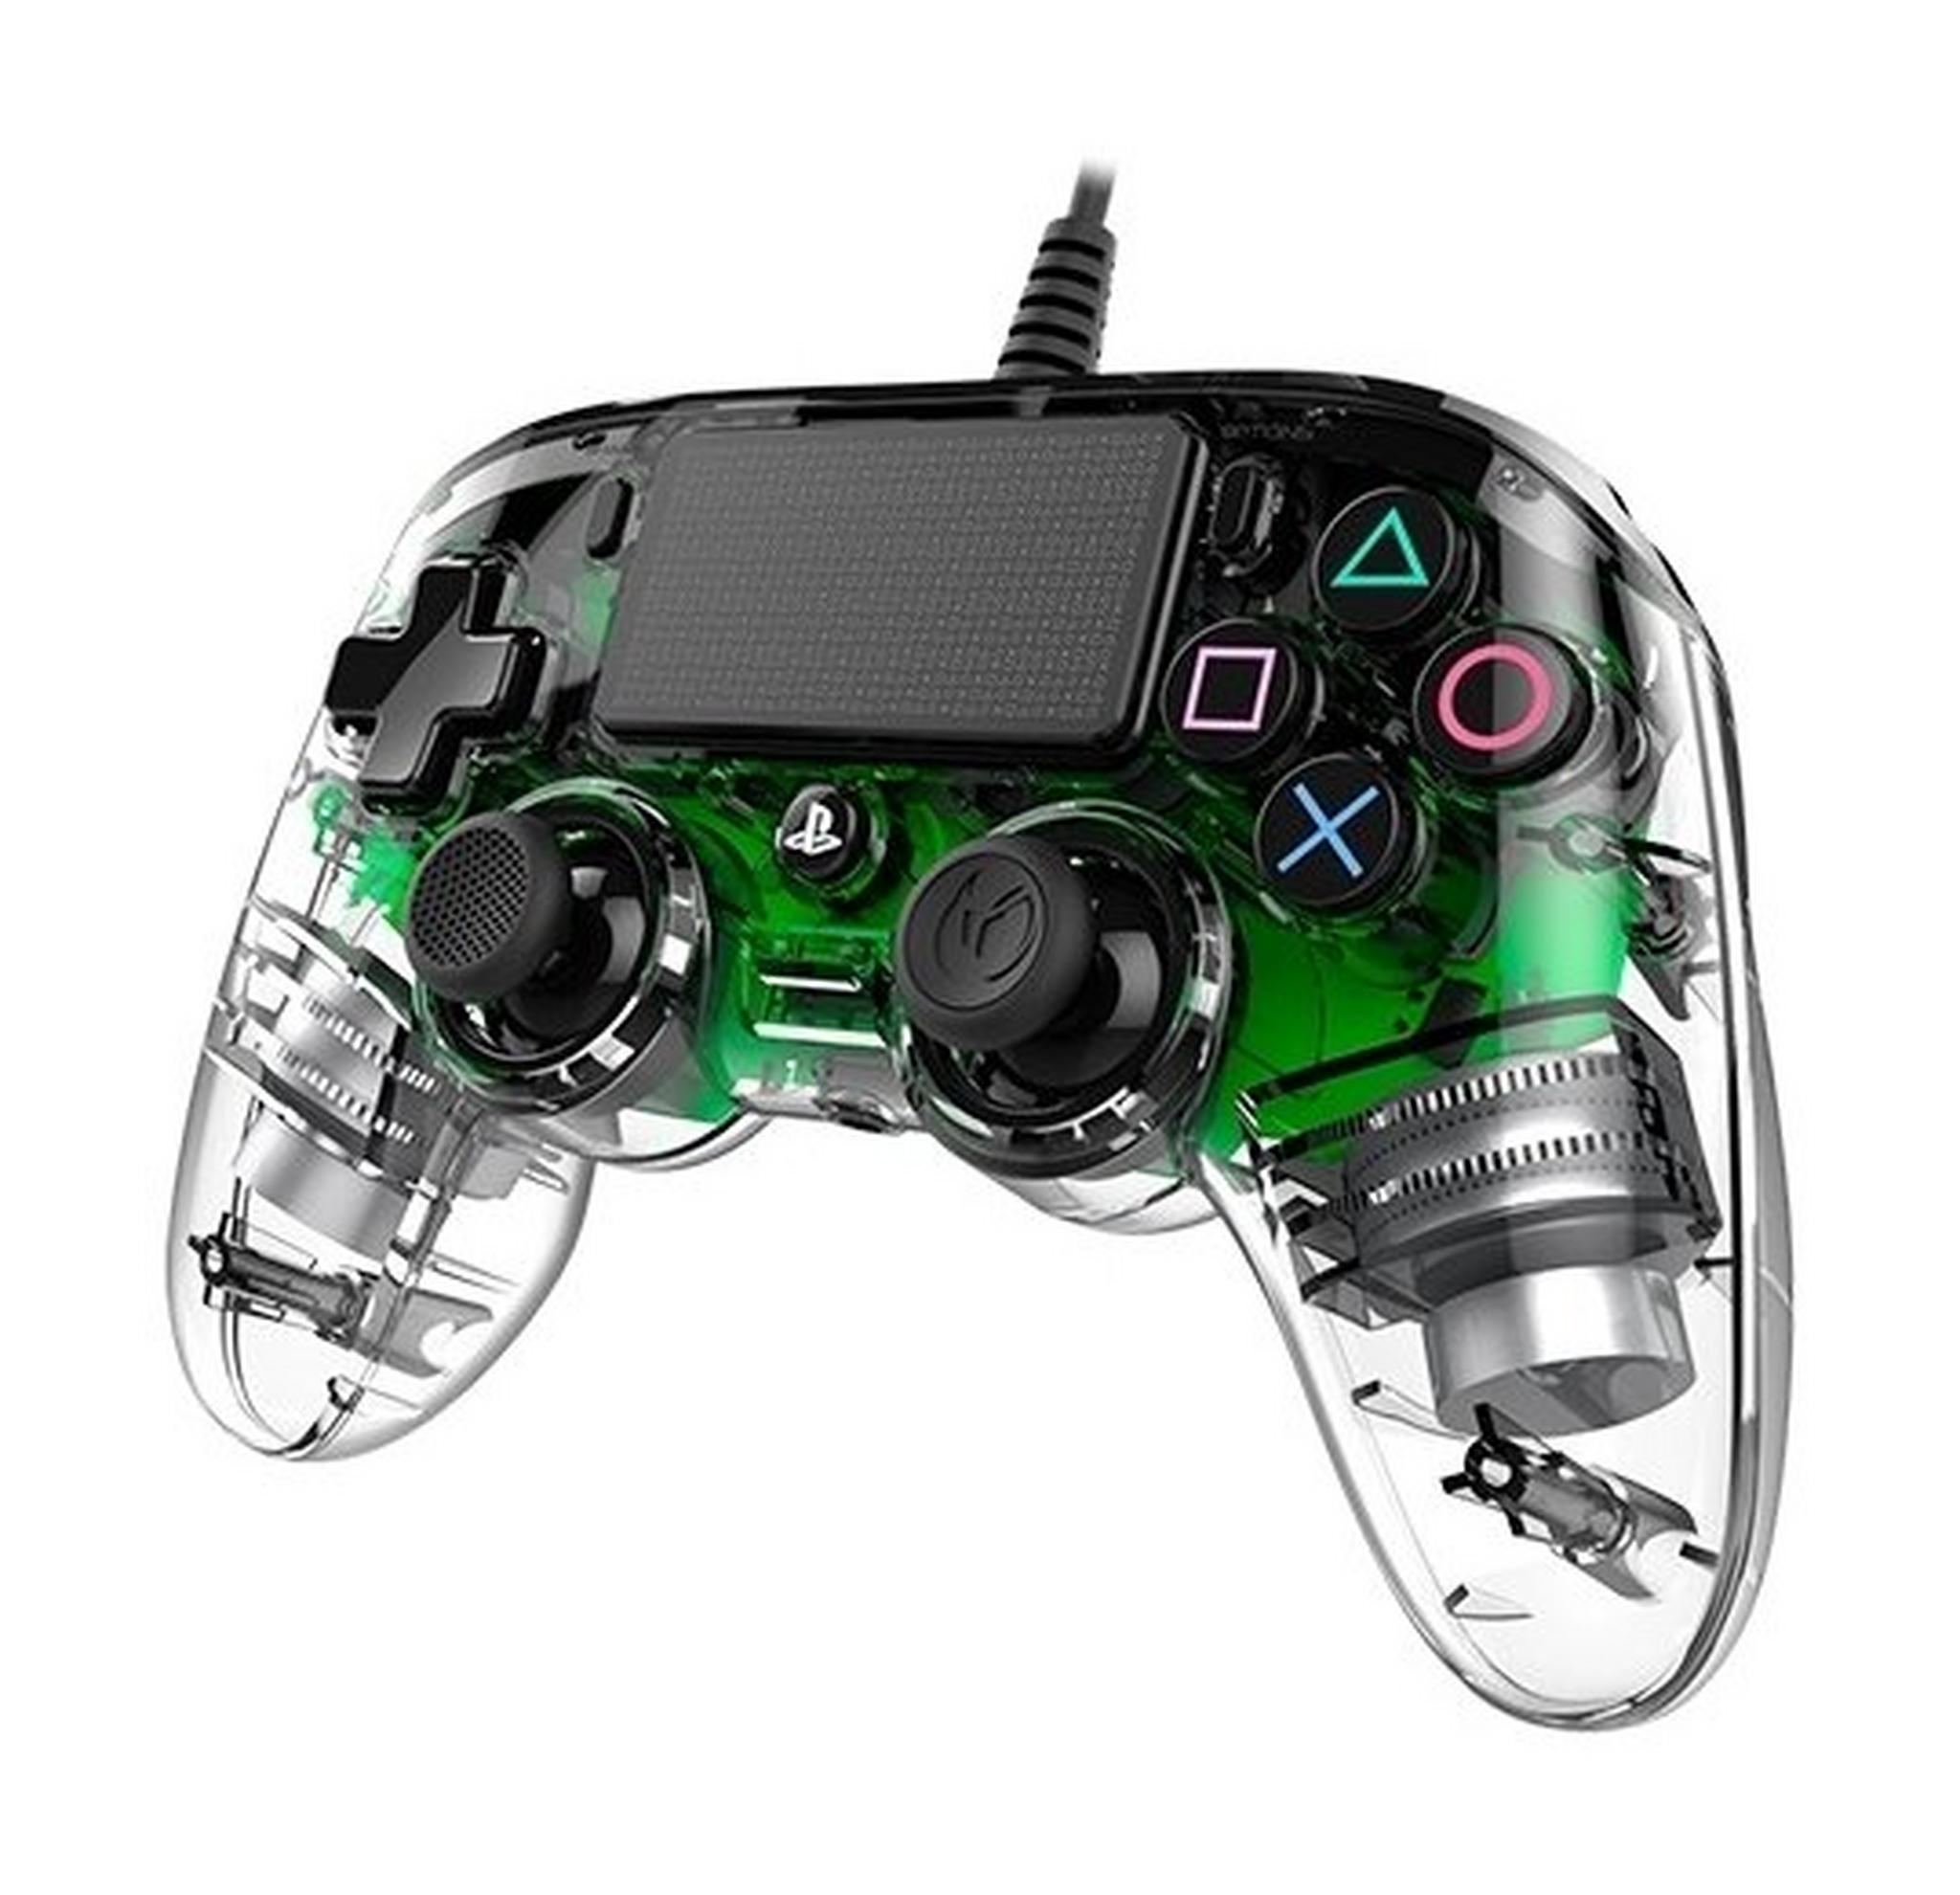 Bigben Nacon PS4 Wired Compact Controller - Green